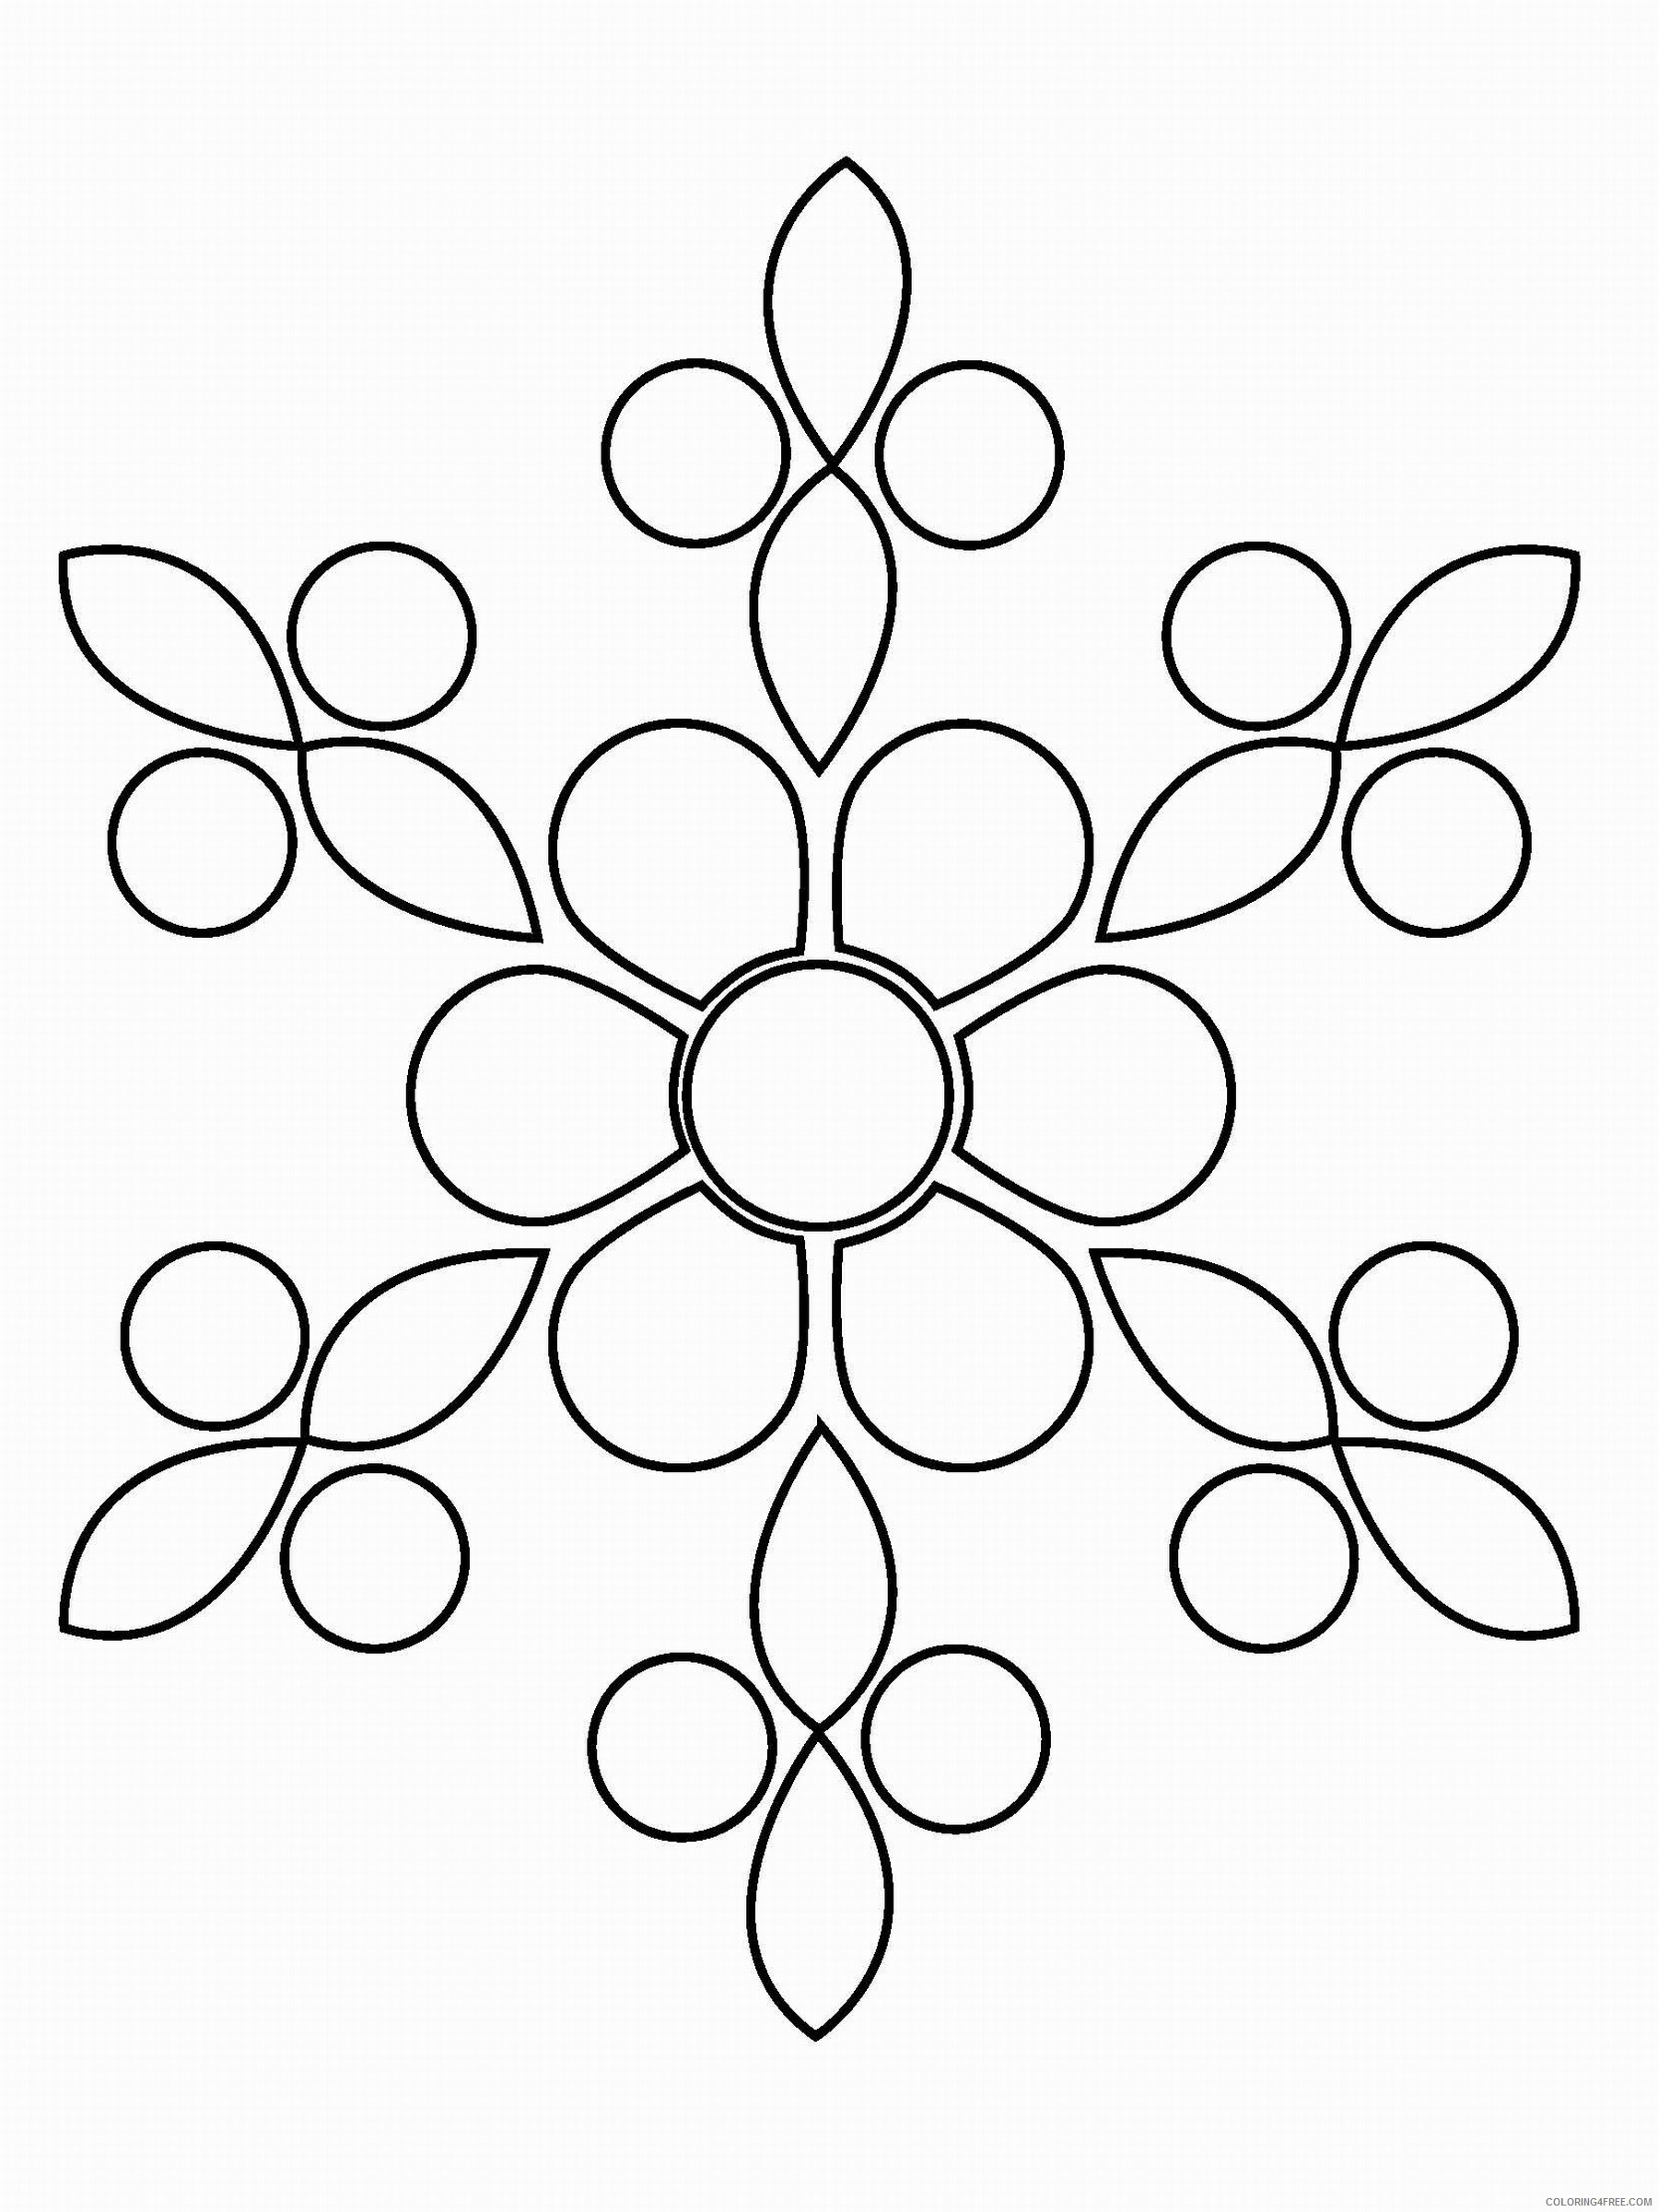 Printable Flower Coloring Pages Flowers Nature flowerc108 Printable 2021 369 Coloring4free